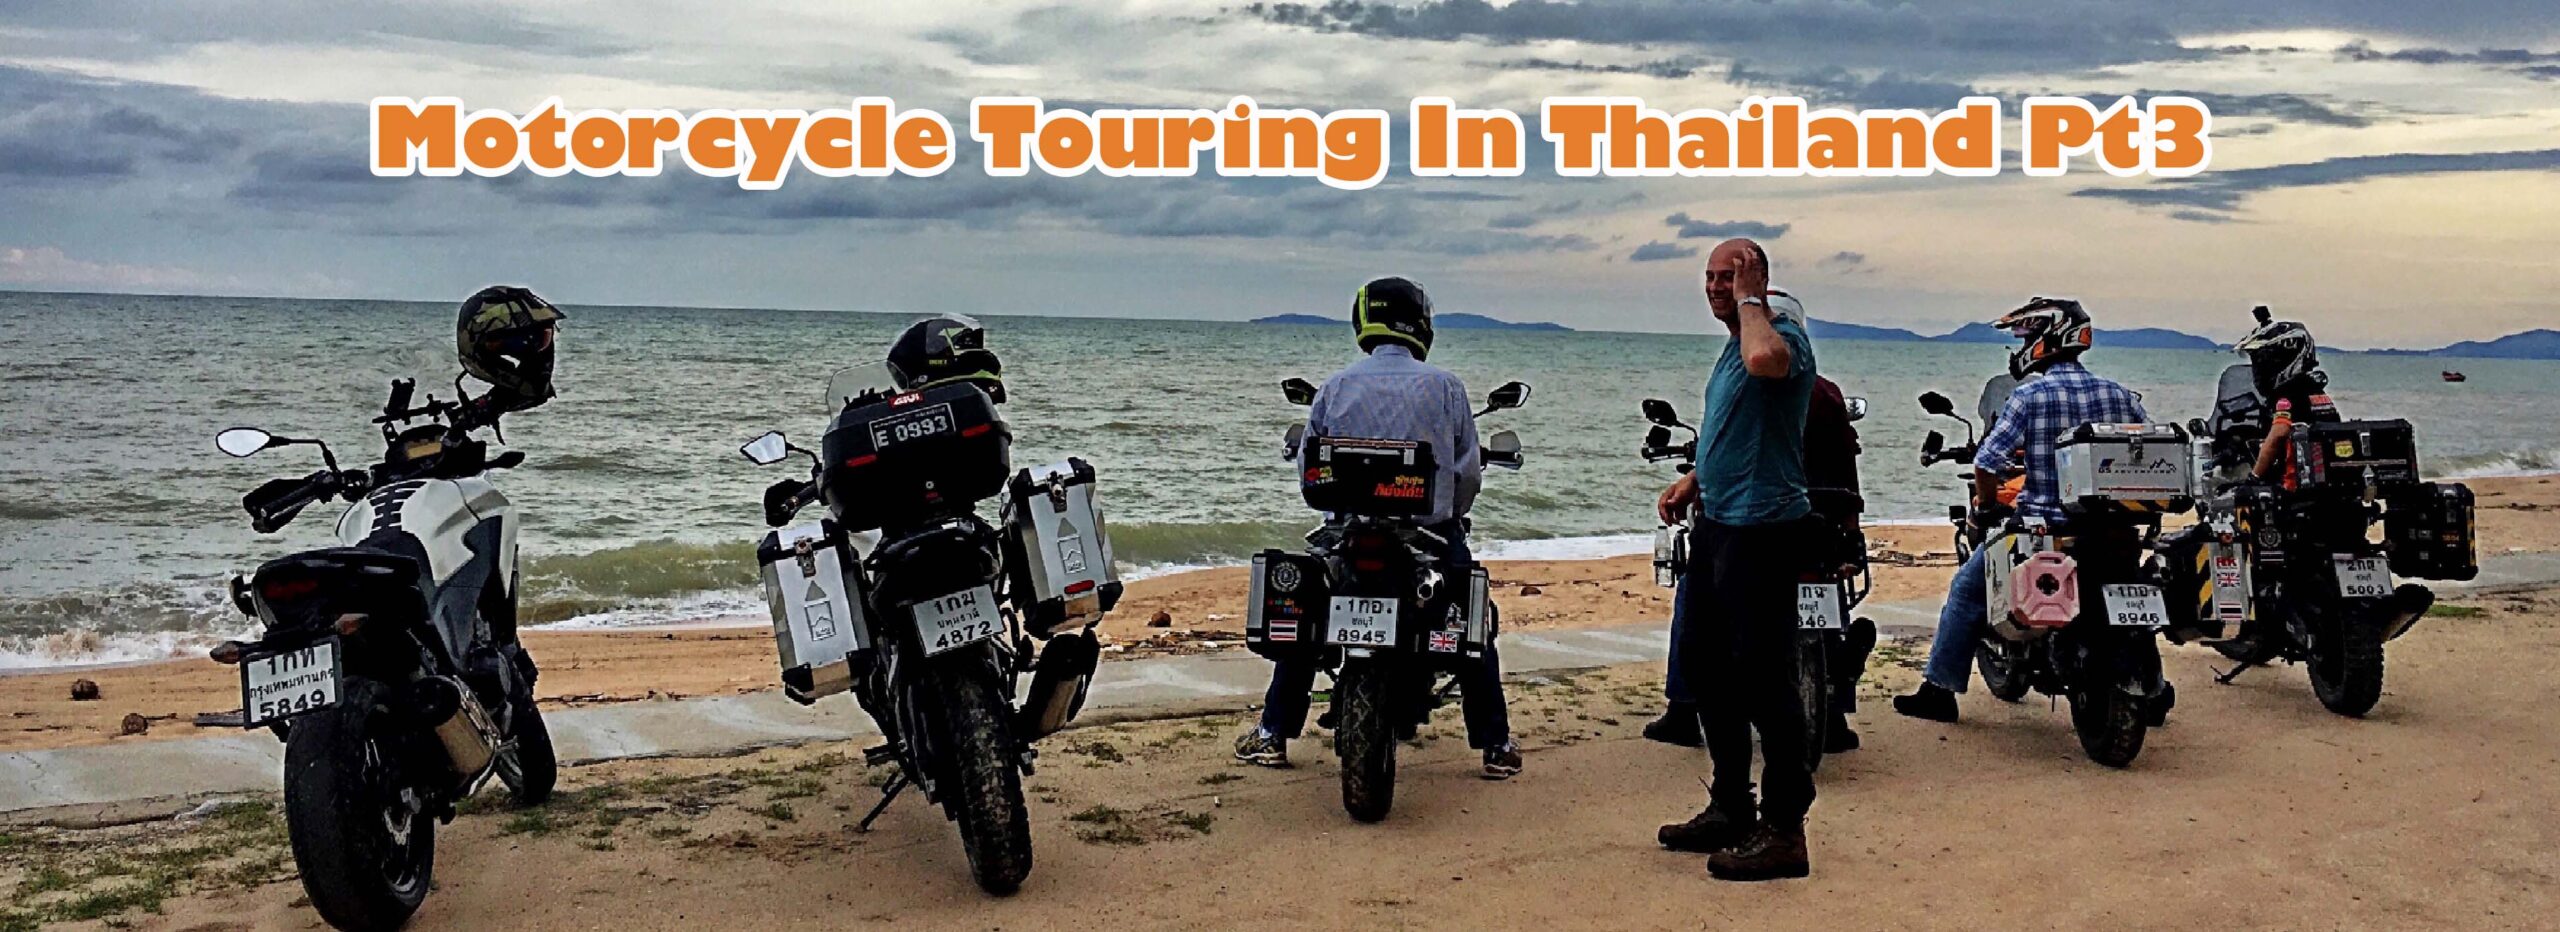 Motorcycle Touring Thailand